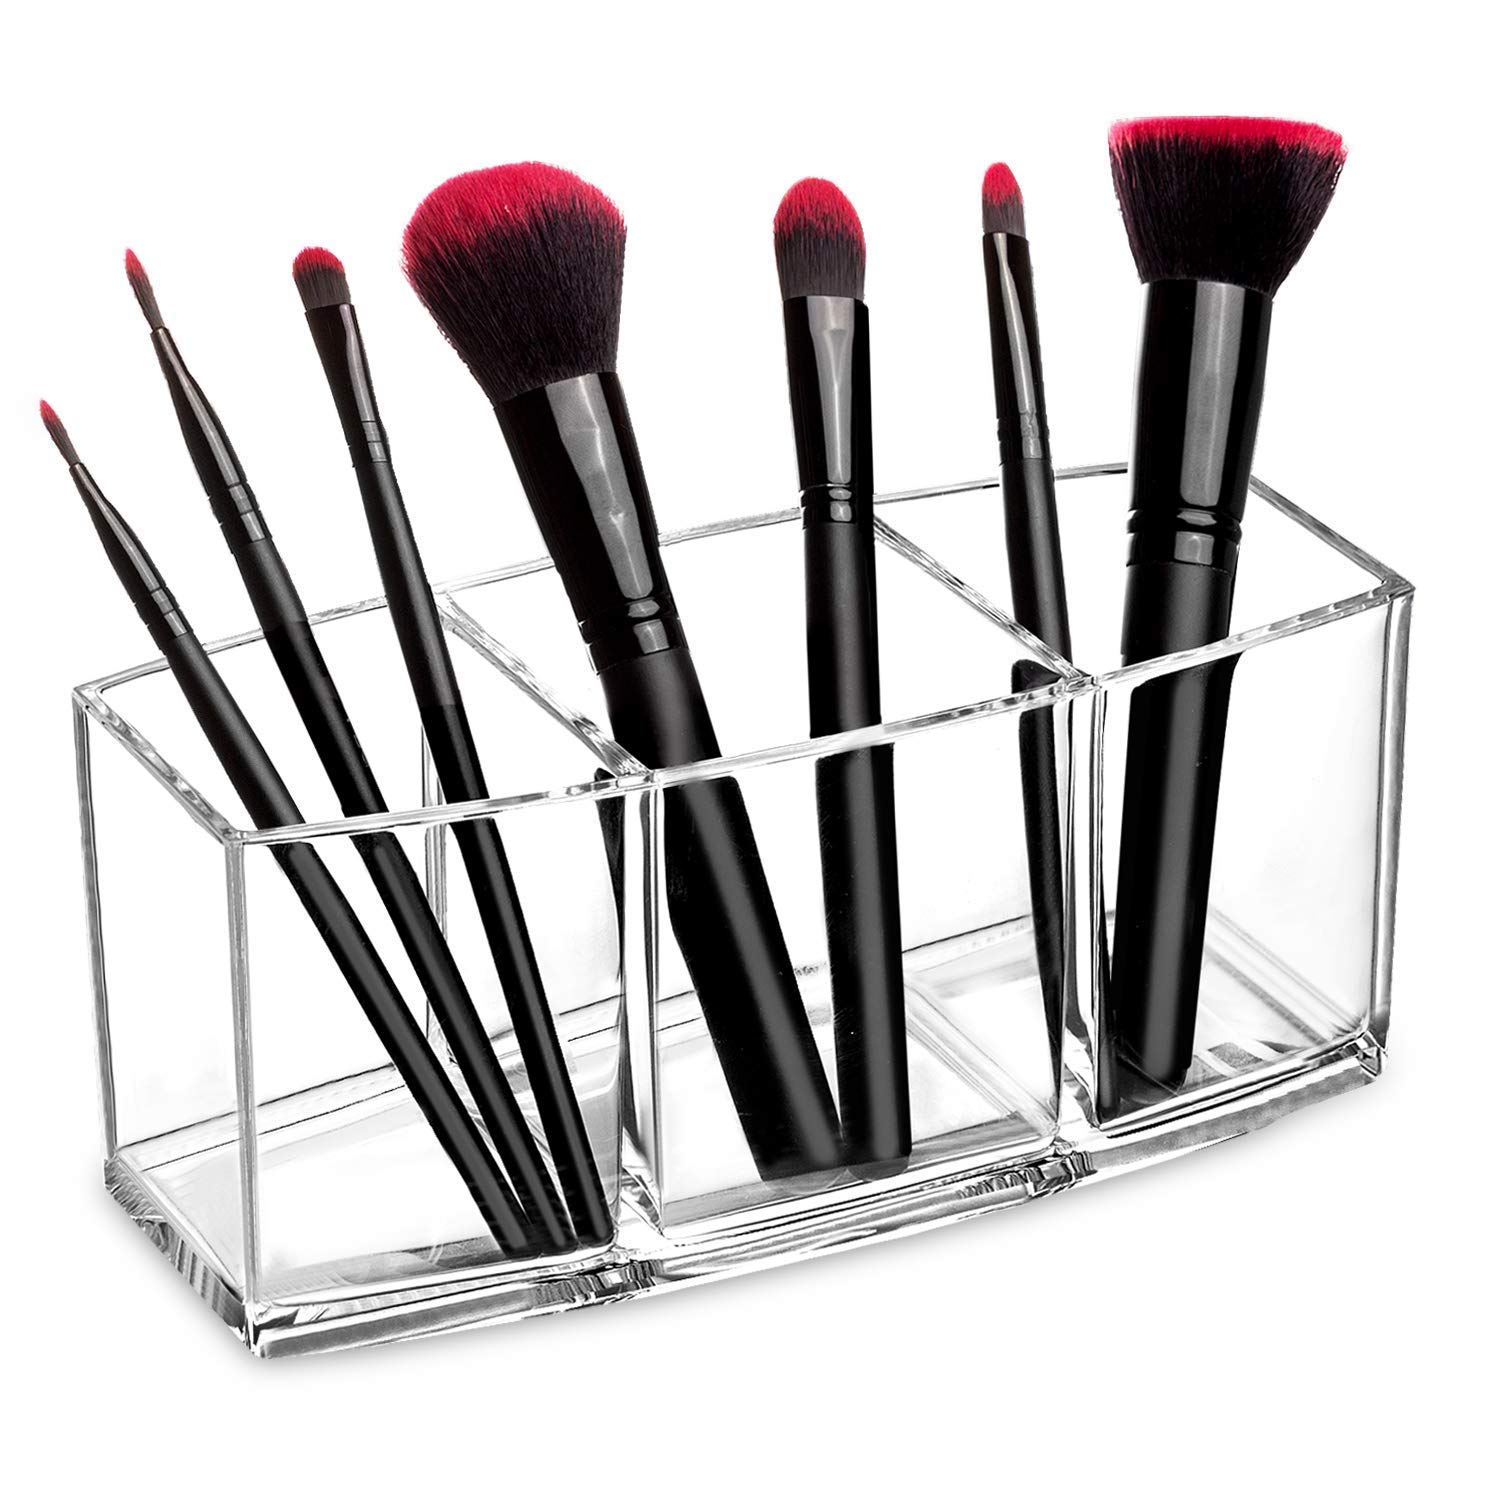 HBlife Clear Makeup Brush Holder Organizer, Acrylic Cosmetic Brushes Storage with 3 Slots, Eyeliners Display Case for Vanity